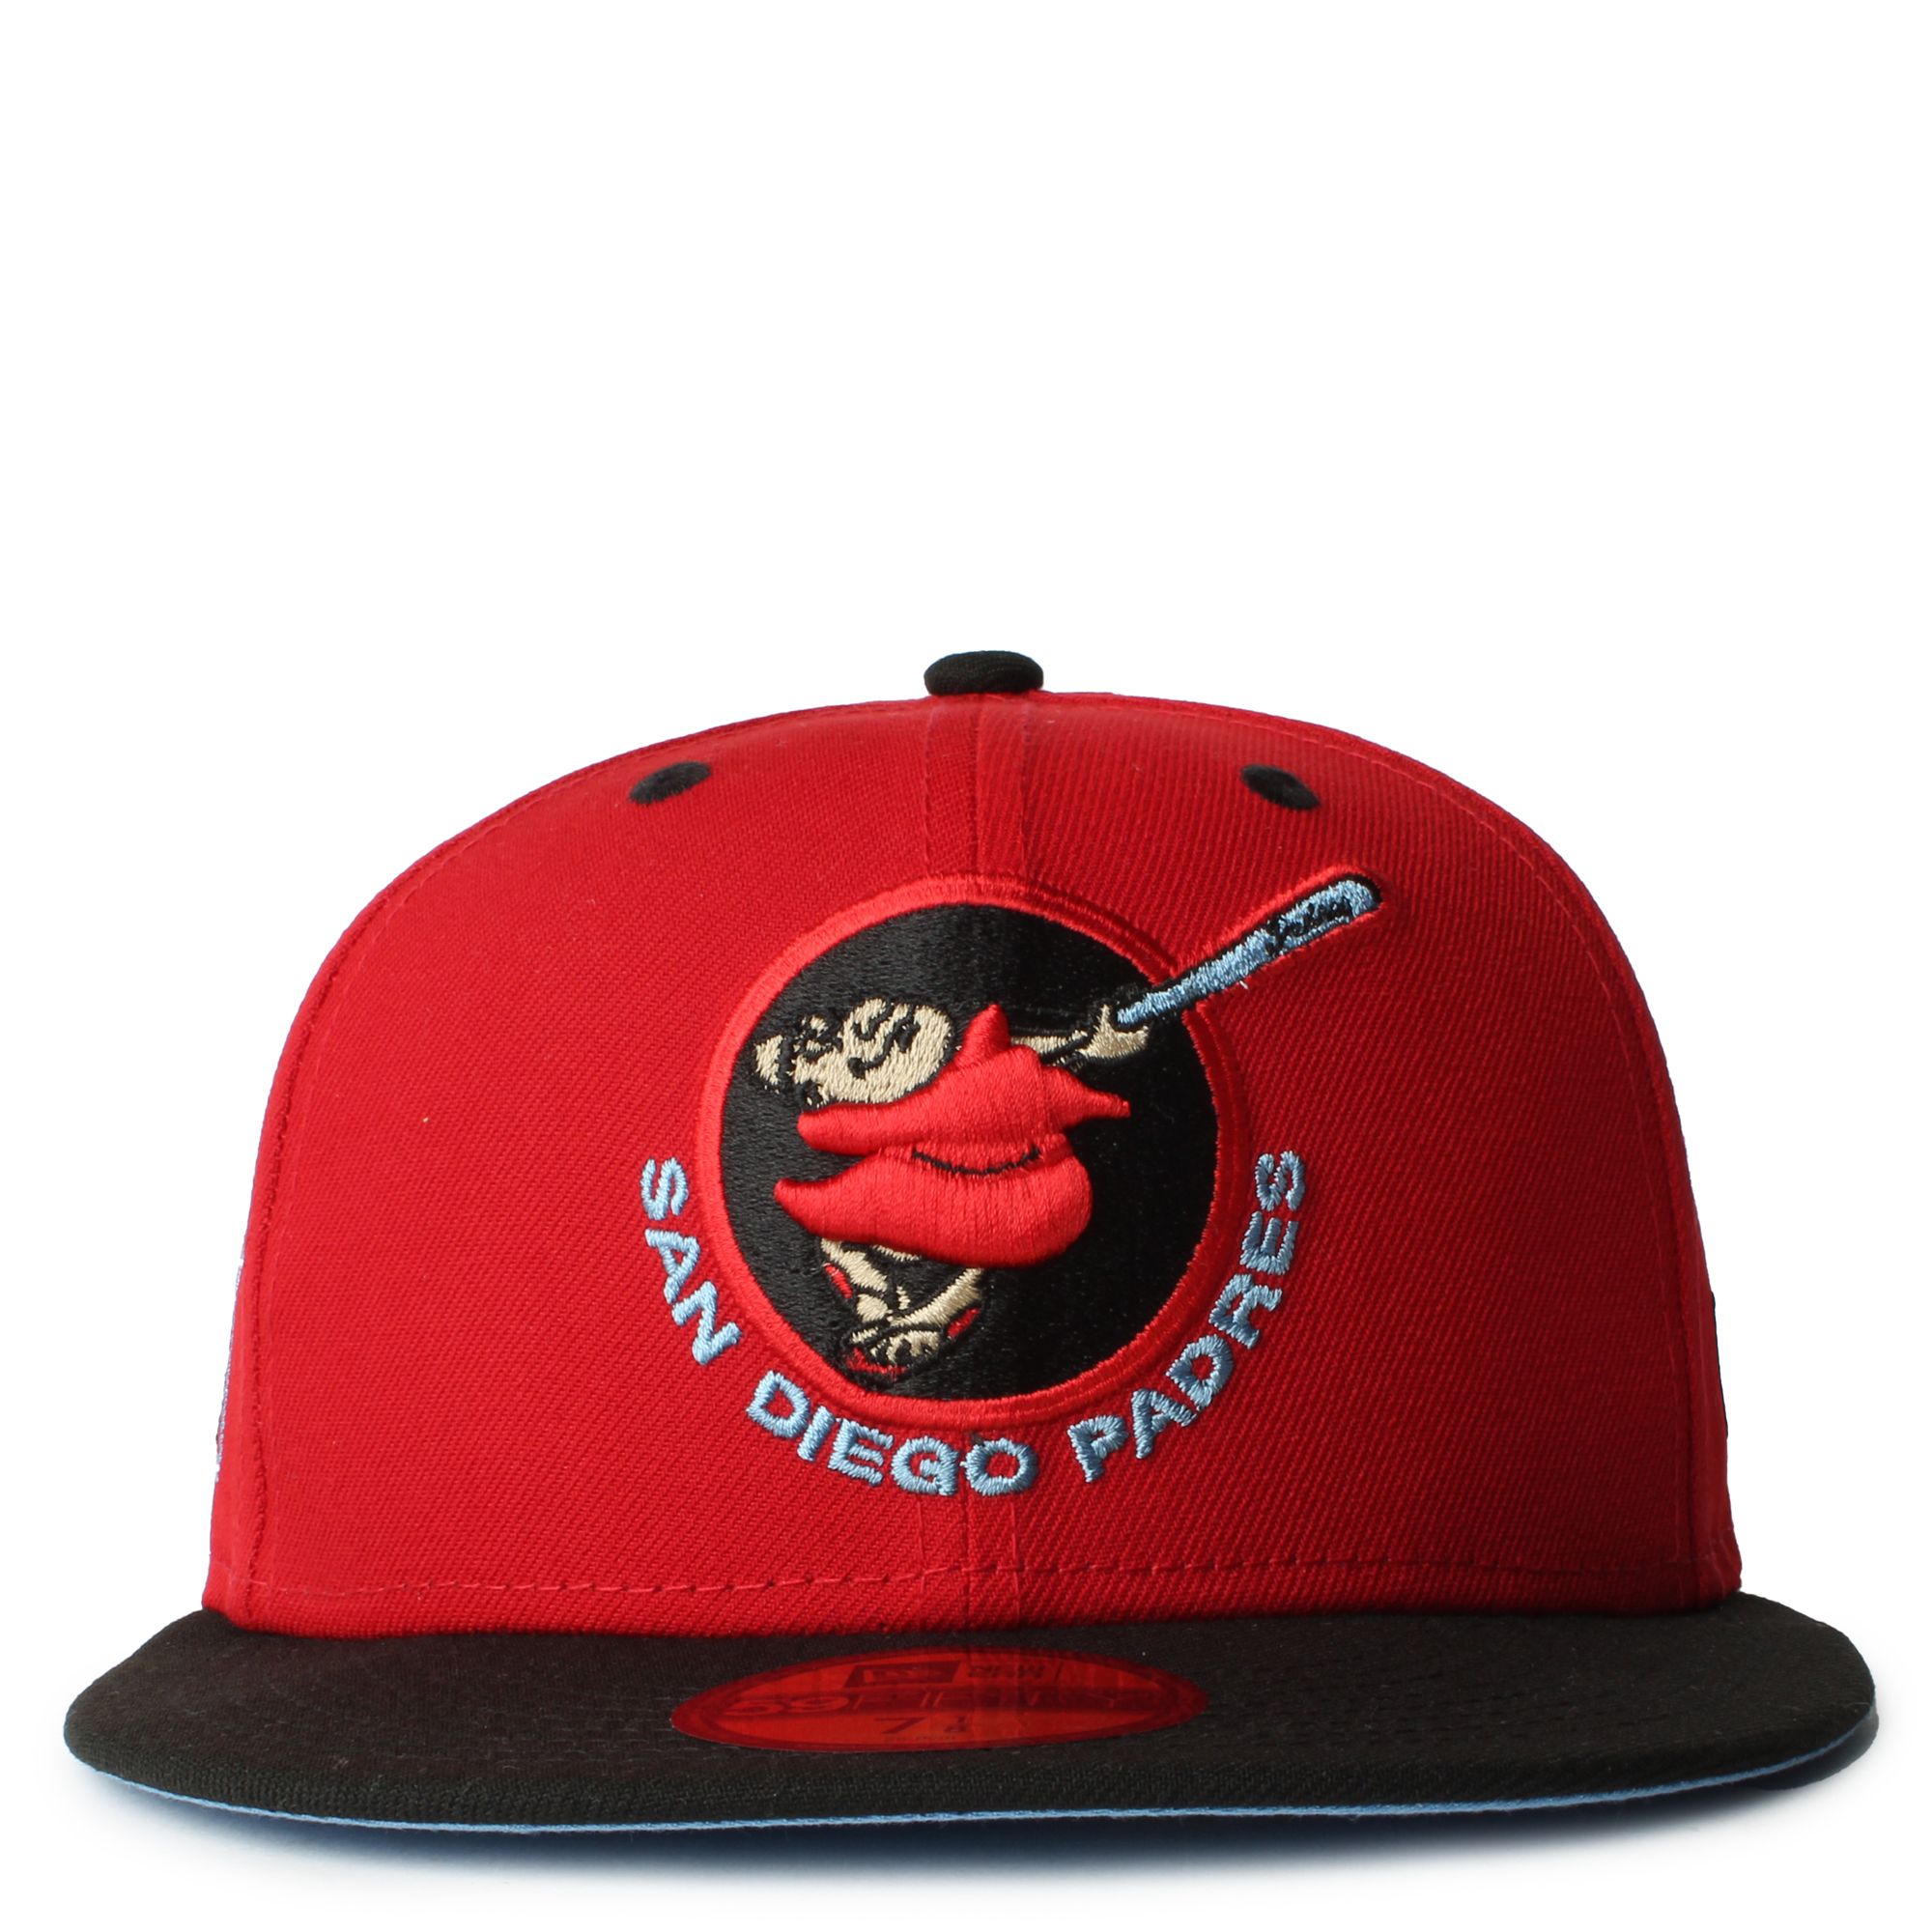 New Era Caps San Diego Padres 59FIFTY Fitted Hat Red/Black